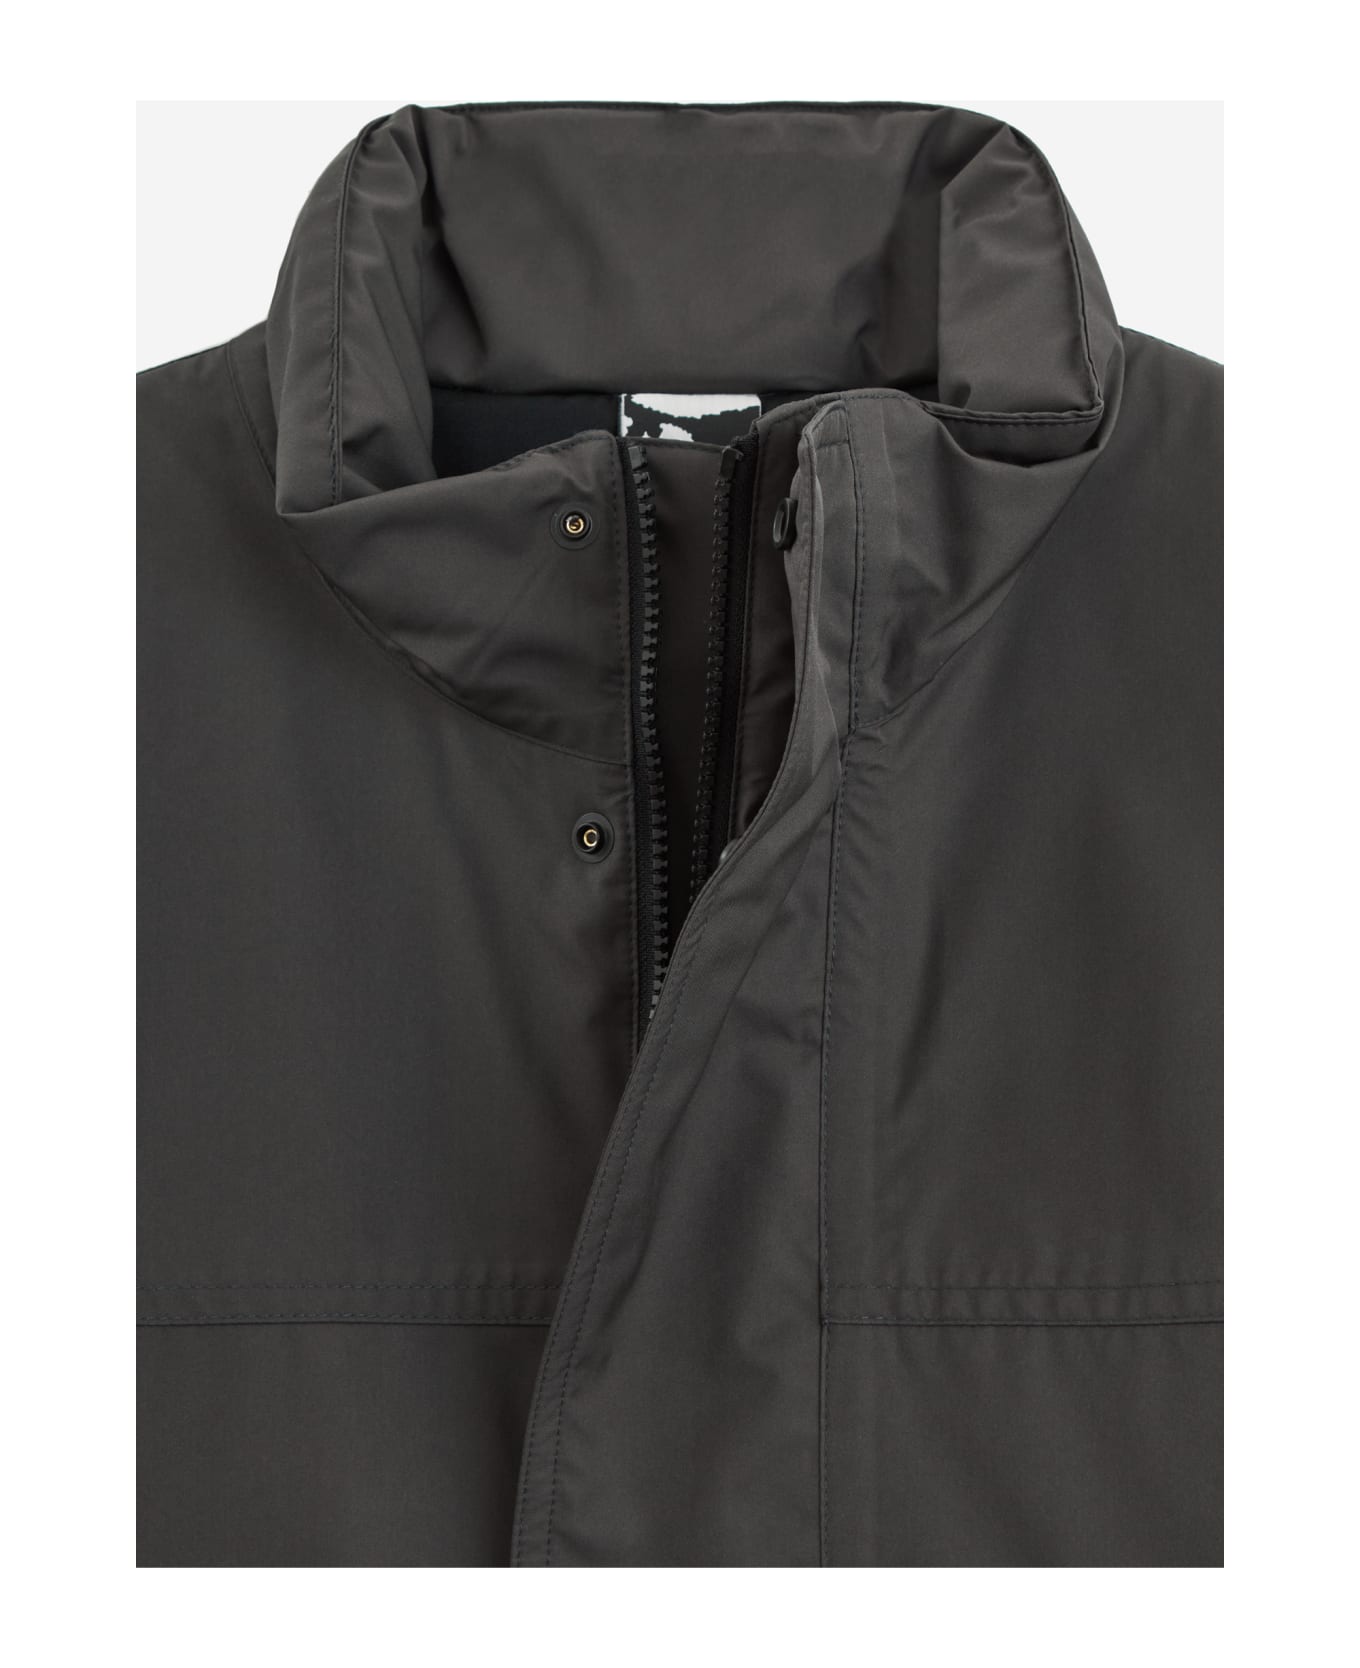 GR10K Insulated Padded Jacket - Coal grey ブレザー